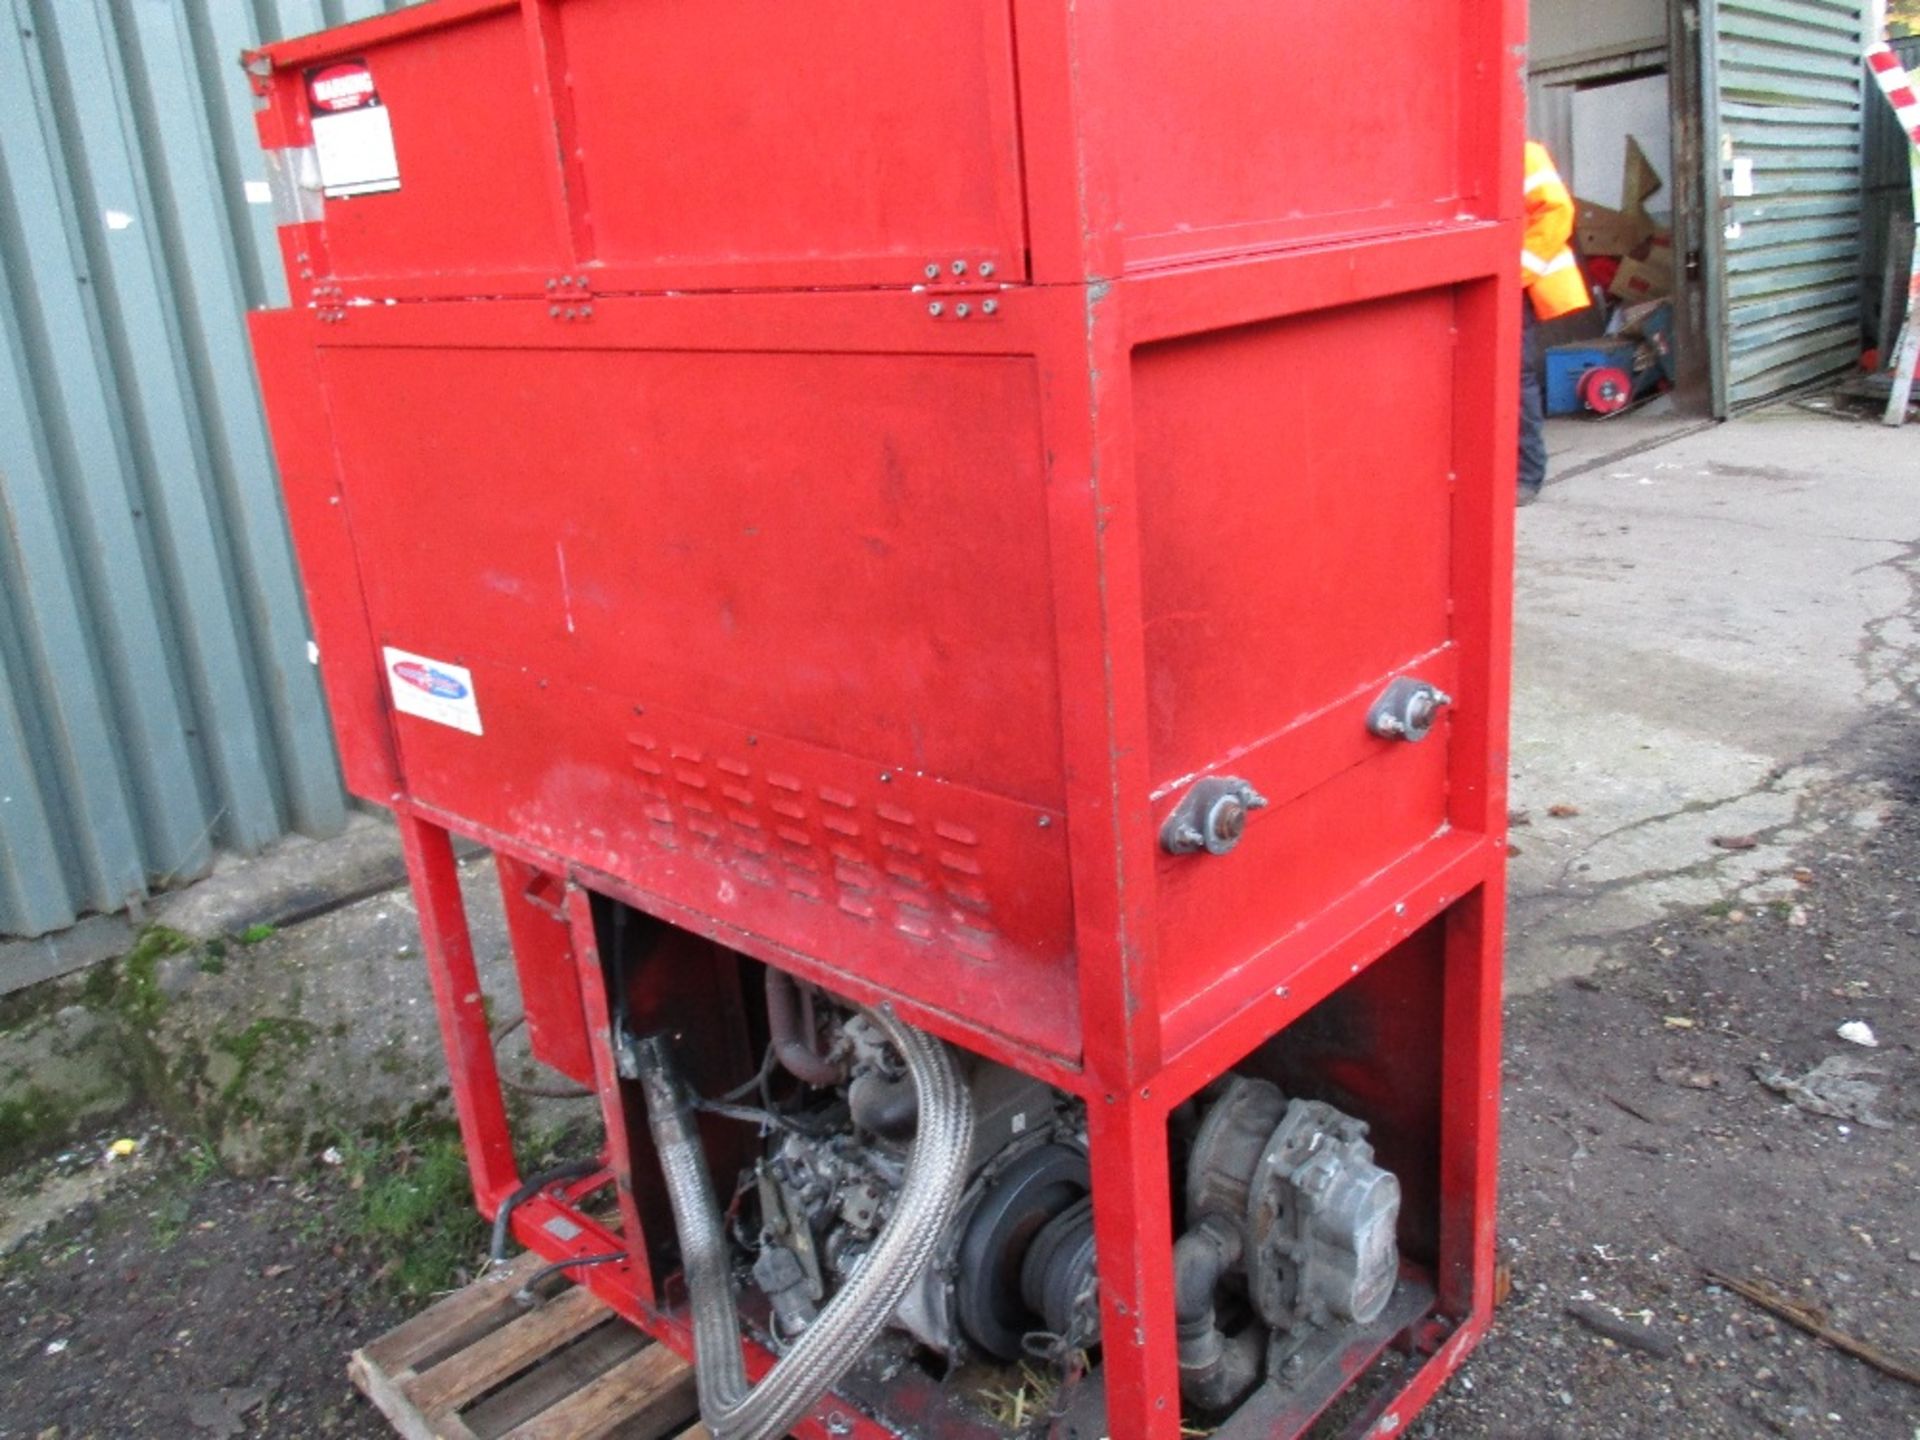 Stewart Energy Lister engined blown insulation machine sourced from company liquidation. - Image 5 of 6